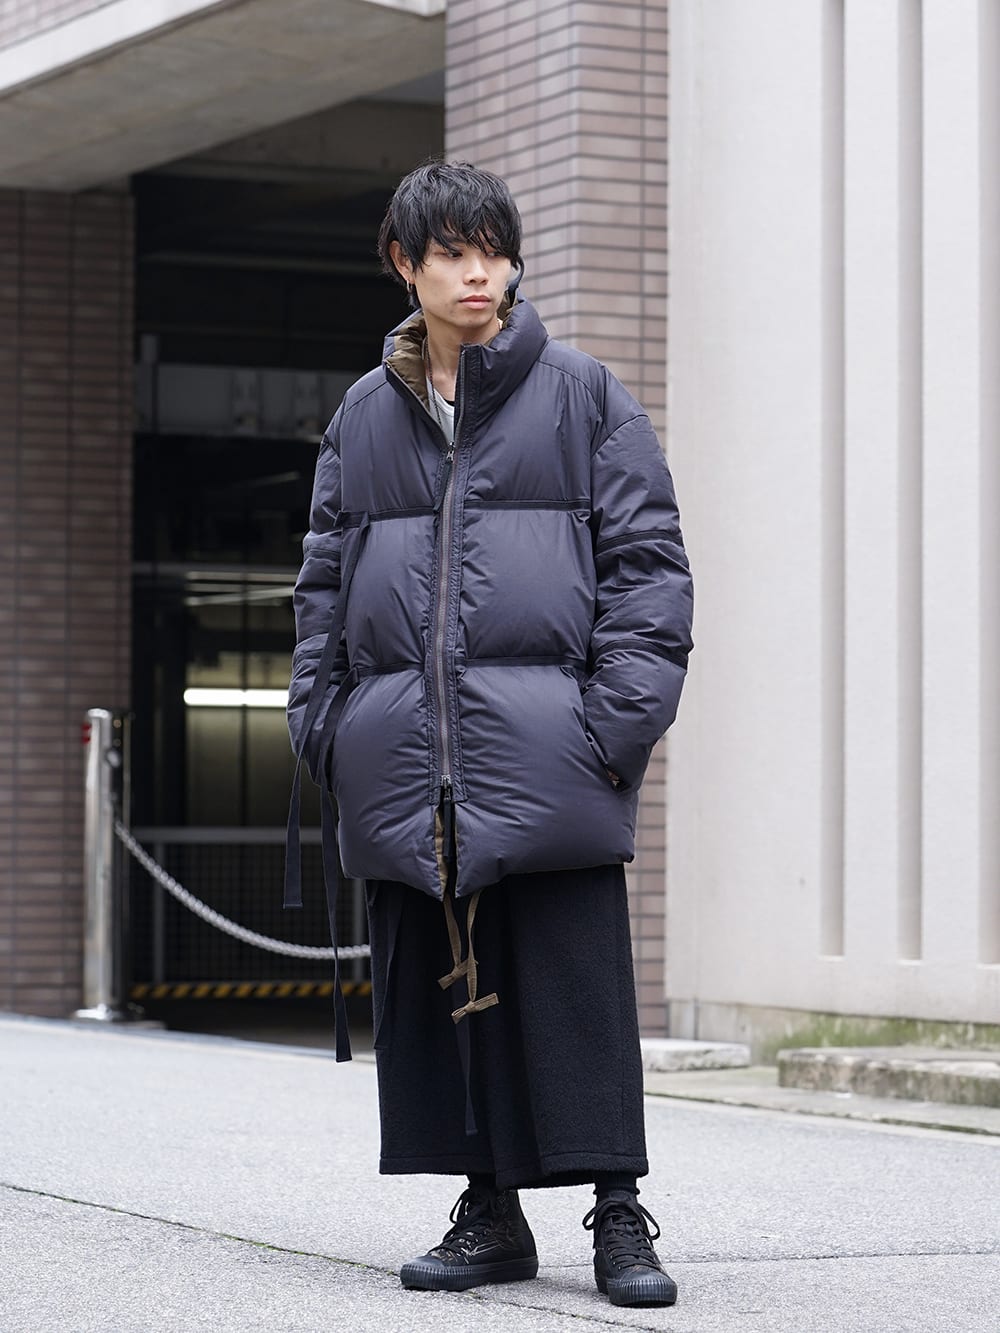 ZIGGY CHEN Over Sized Down Jacket Style - FASCINATE BLOG